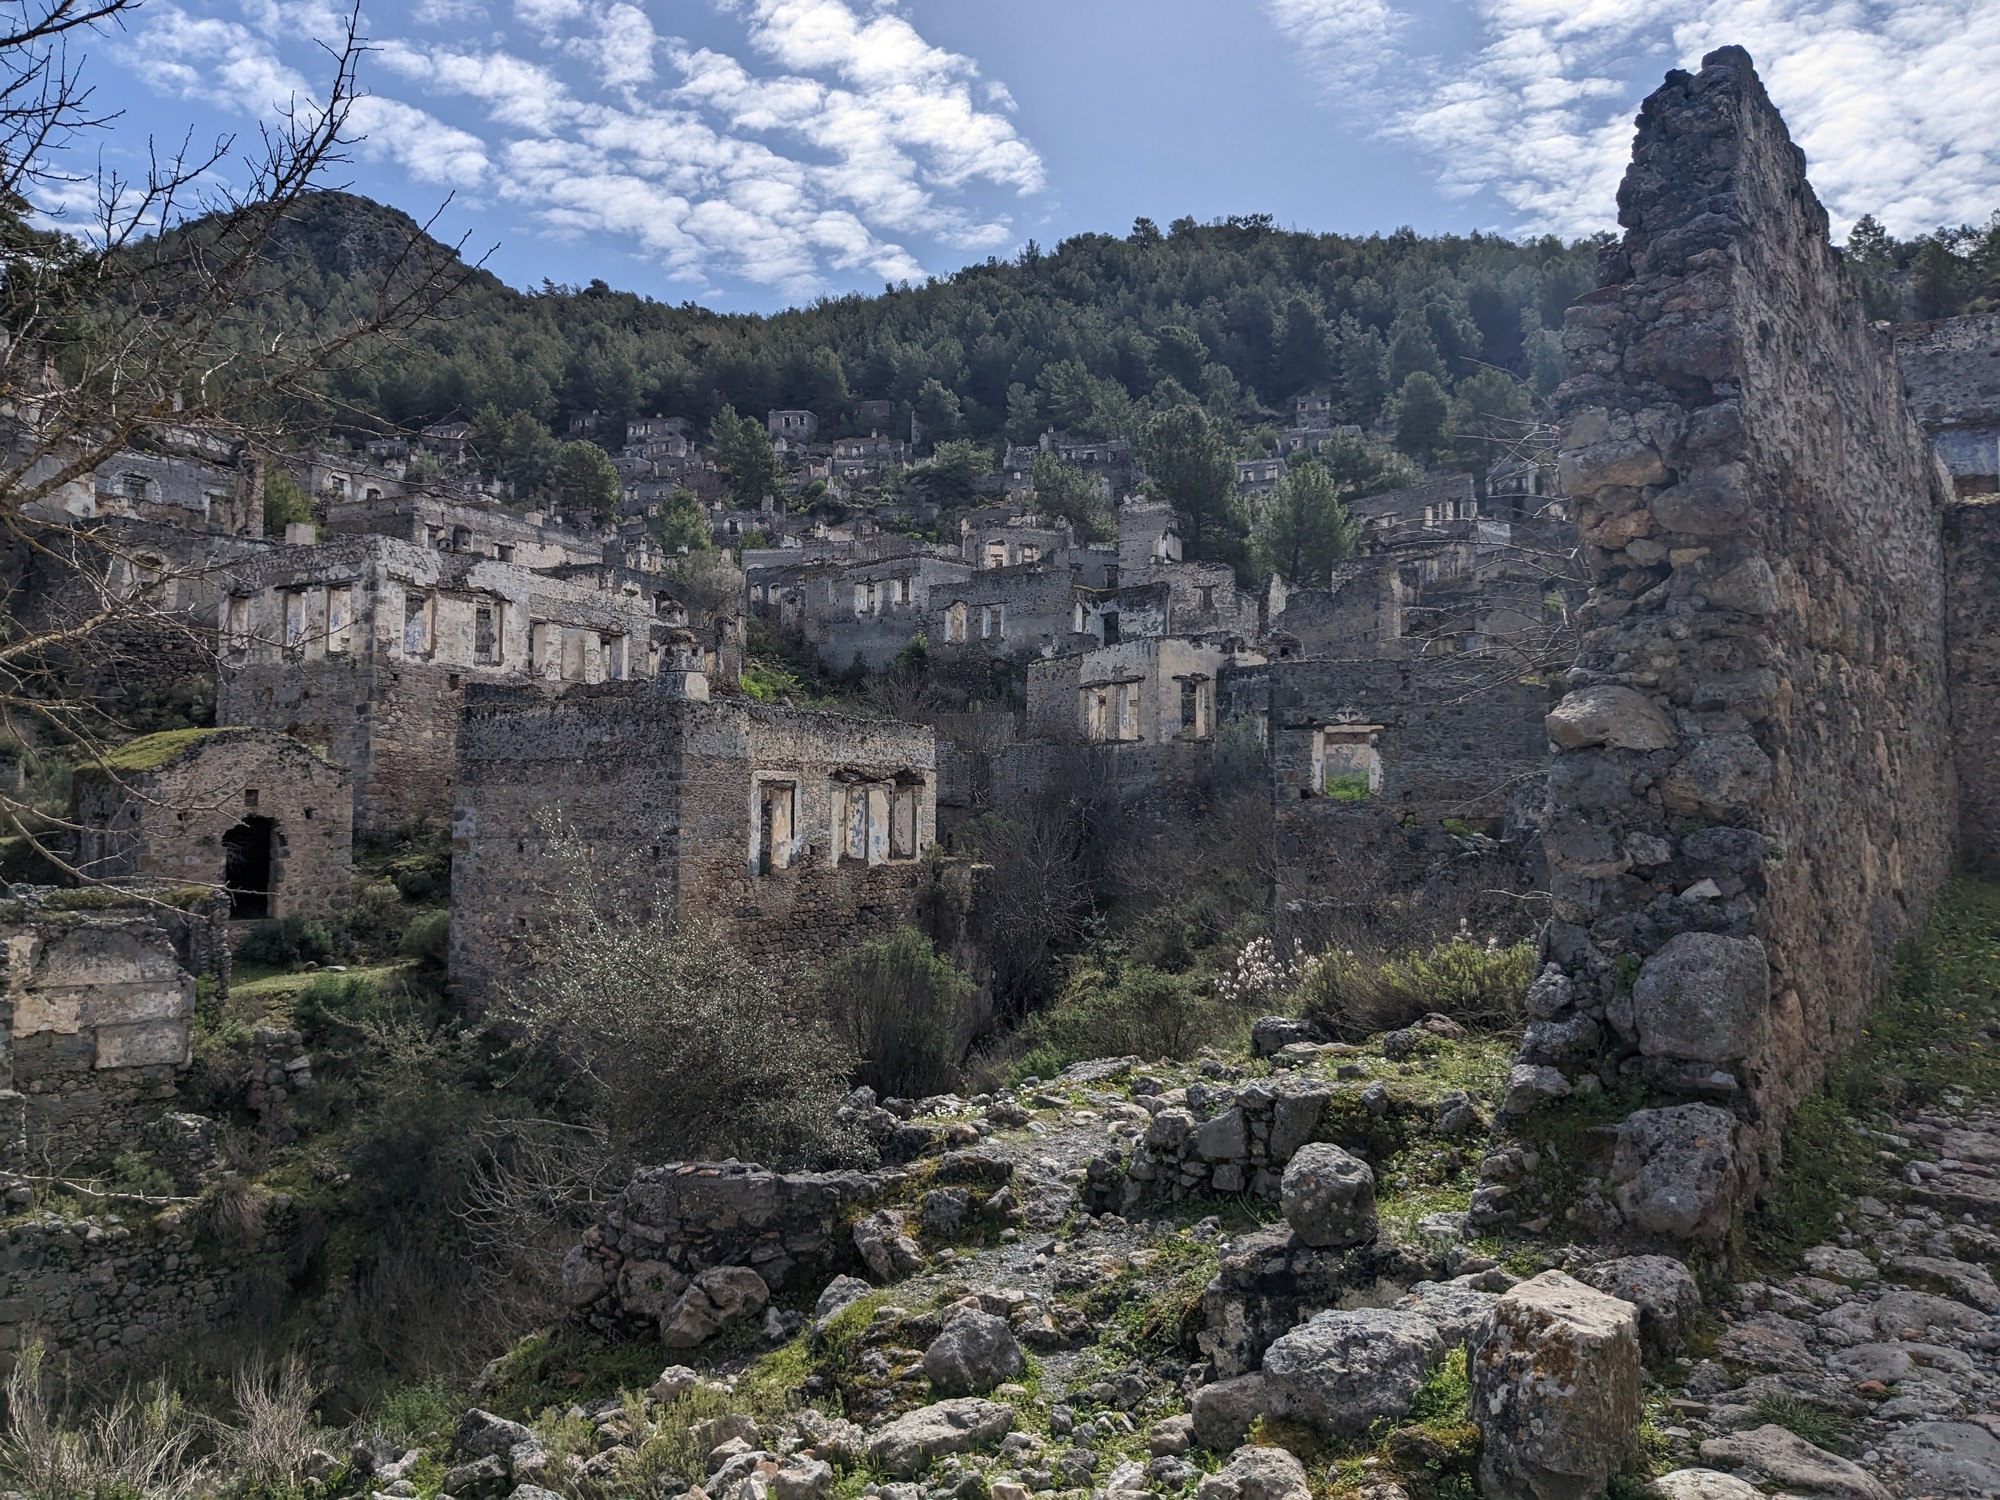 Abandon stone houses from 100 years ago